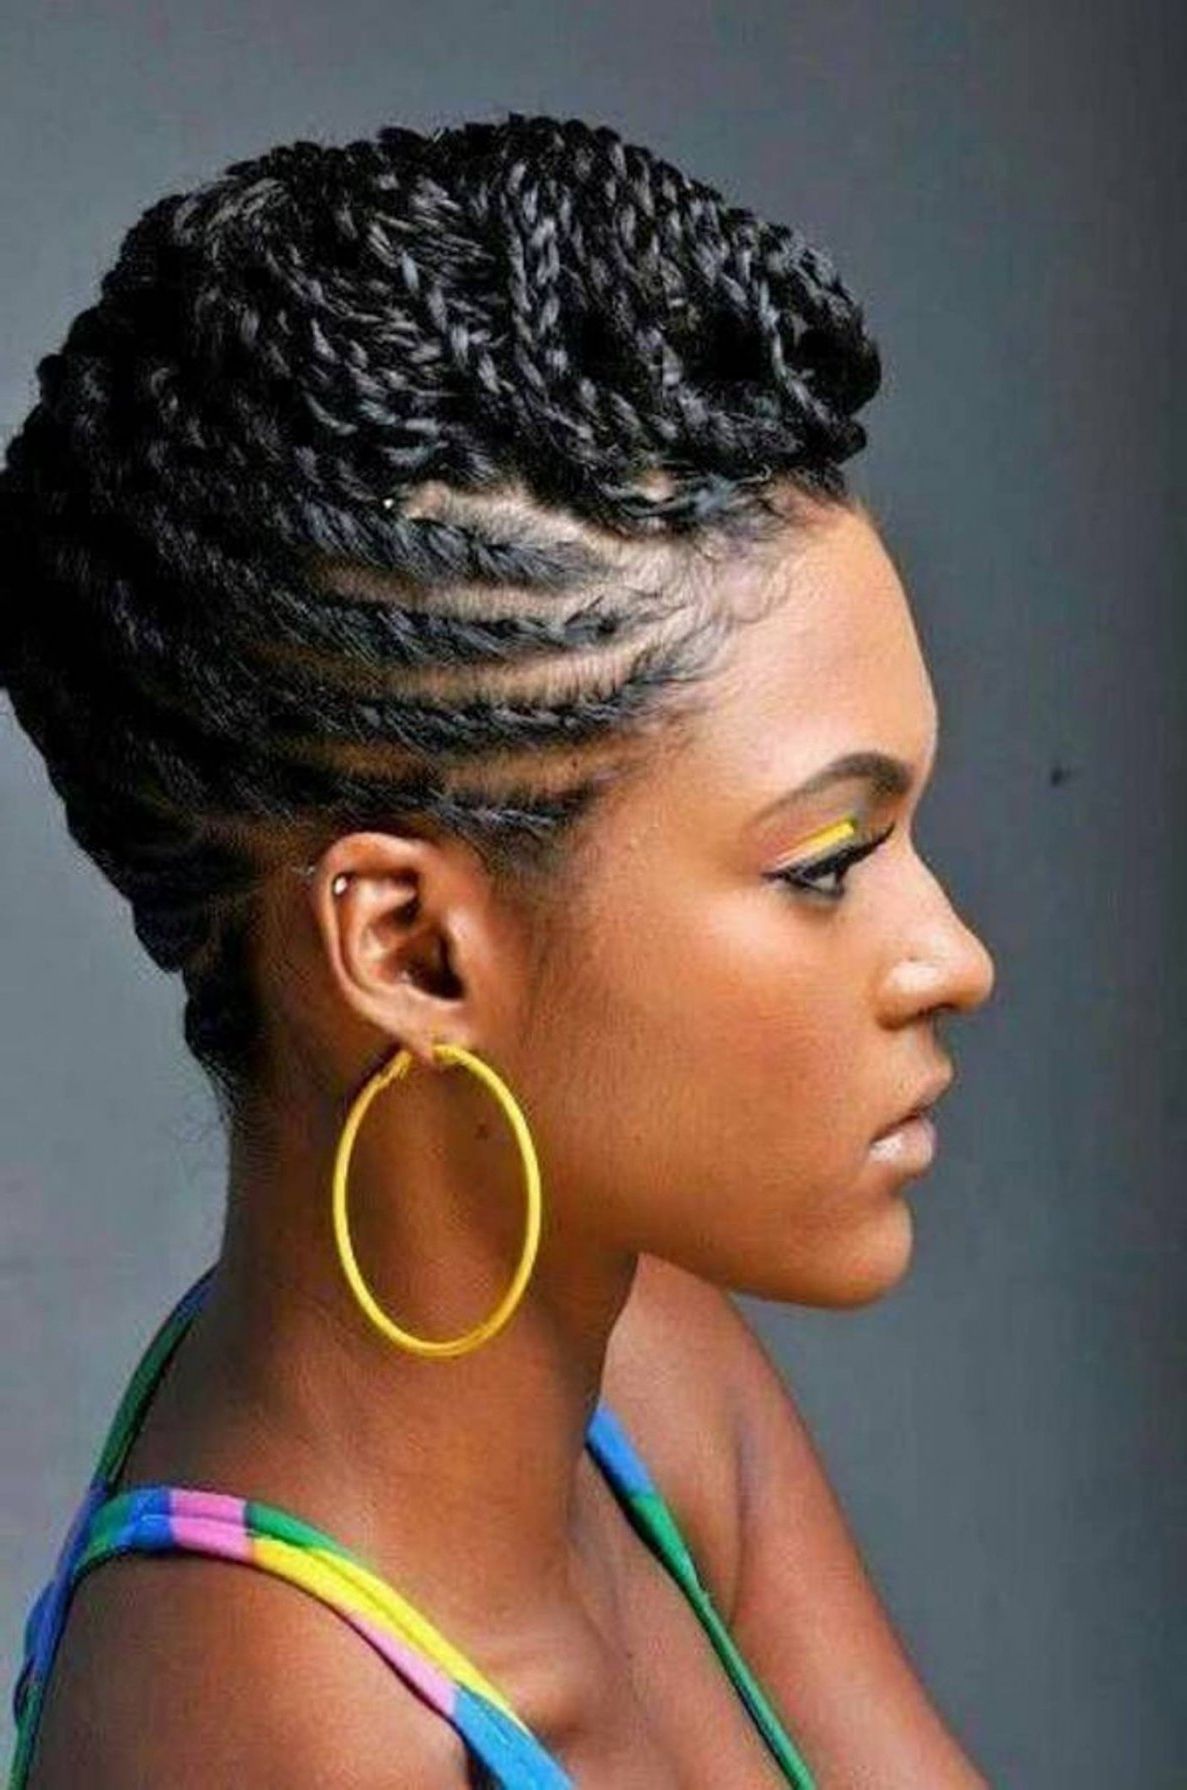 25 Updo Hairstyles For Black Women Throughout Short Braided With Updo Hairstyles With Bangs For Black Hair (View 5 of 15)